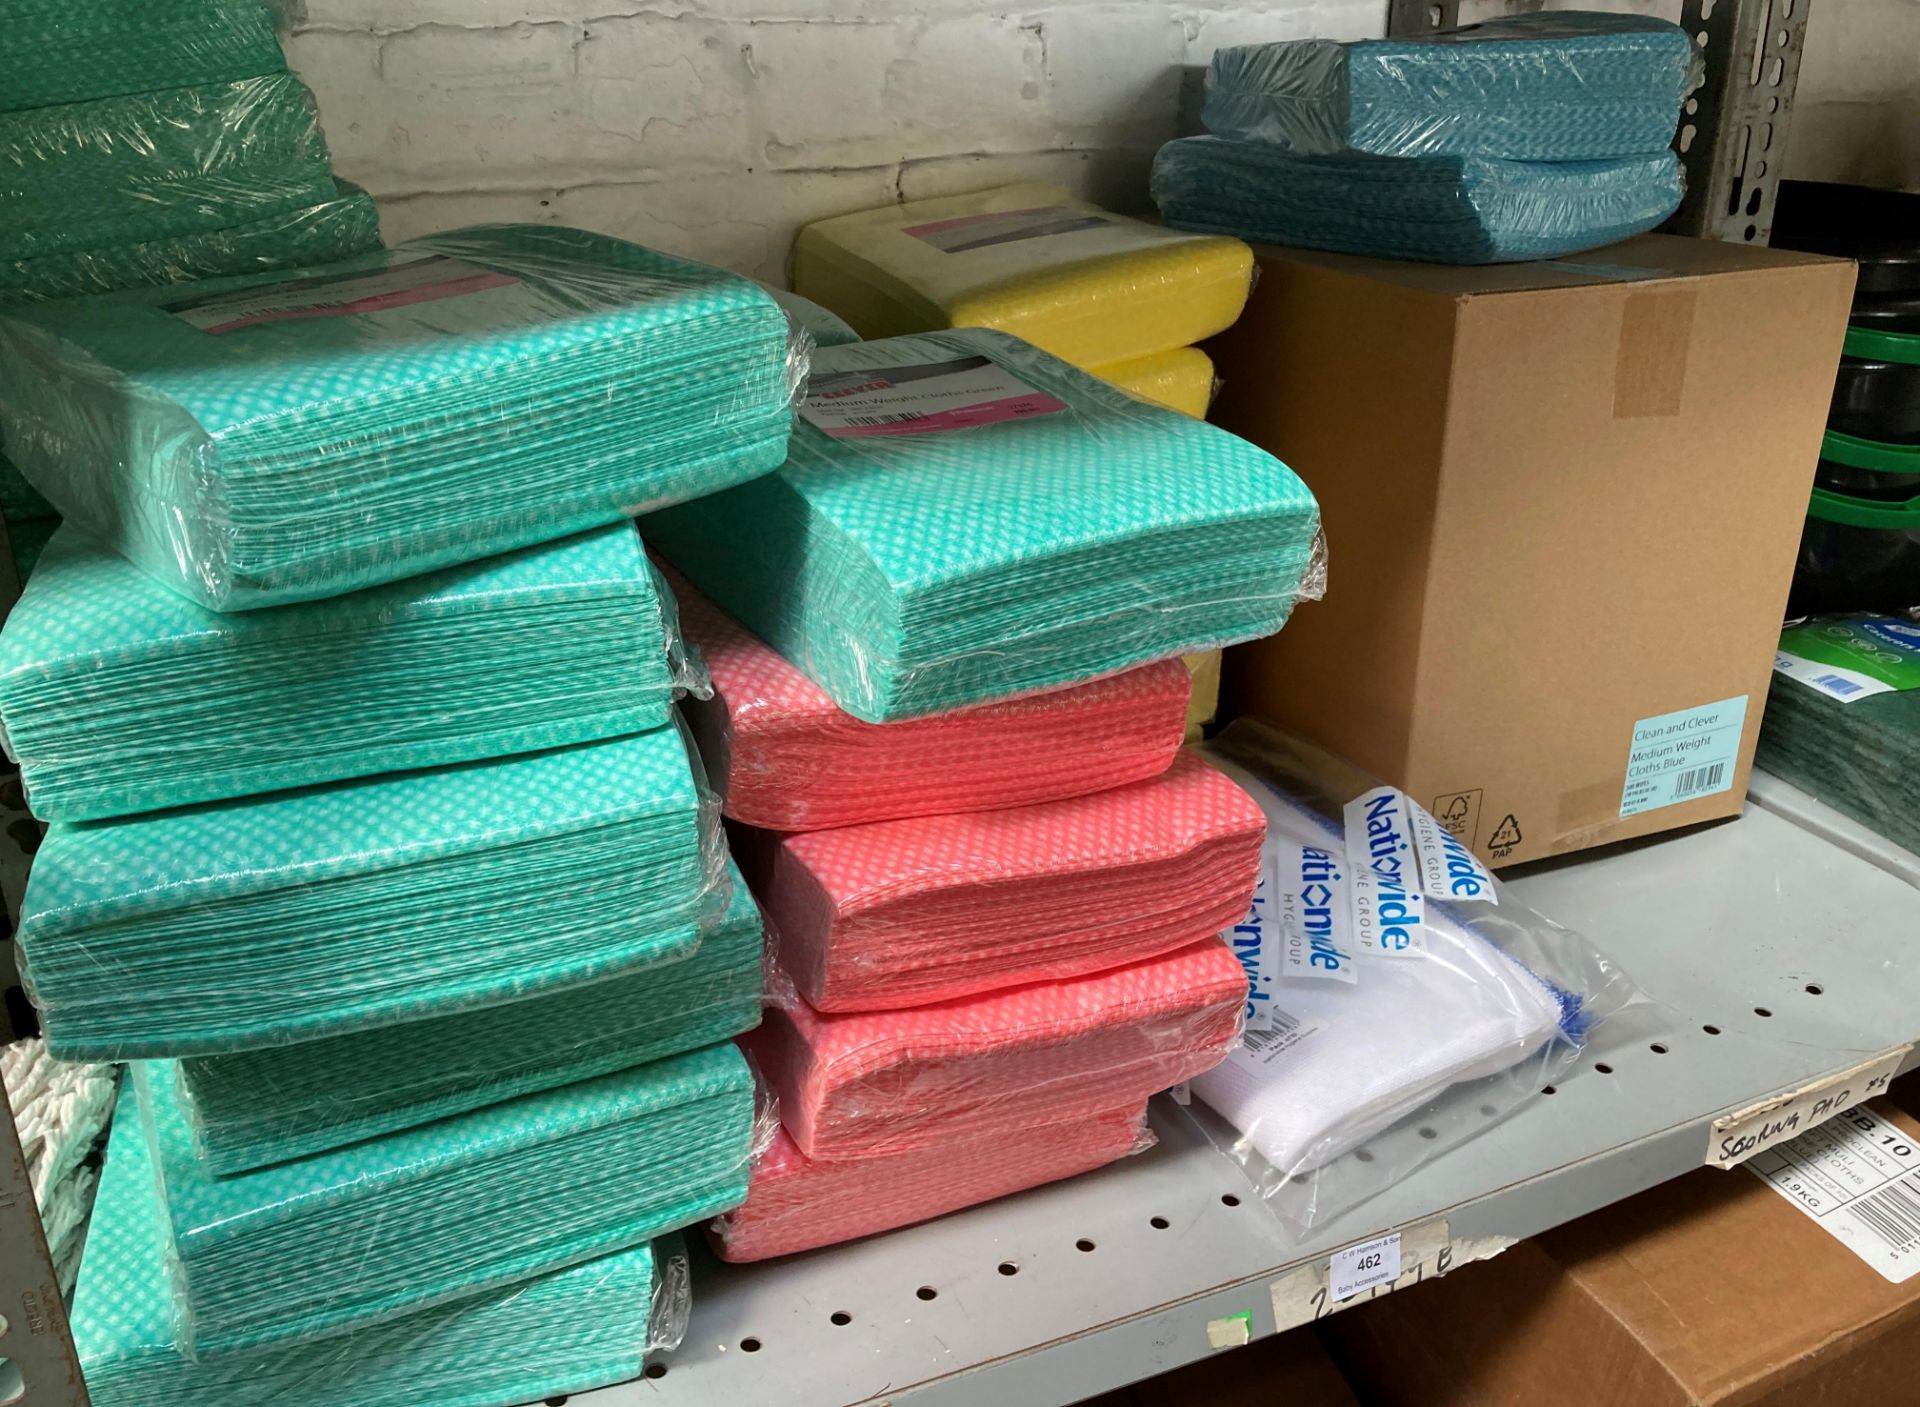 Contents to three-shelves - 30 x packs (50 to pack) of Clean and Clever Micro-fibre cleaning cloths - Image 3 of 4